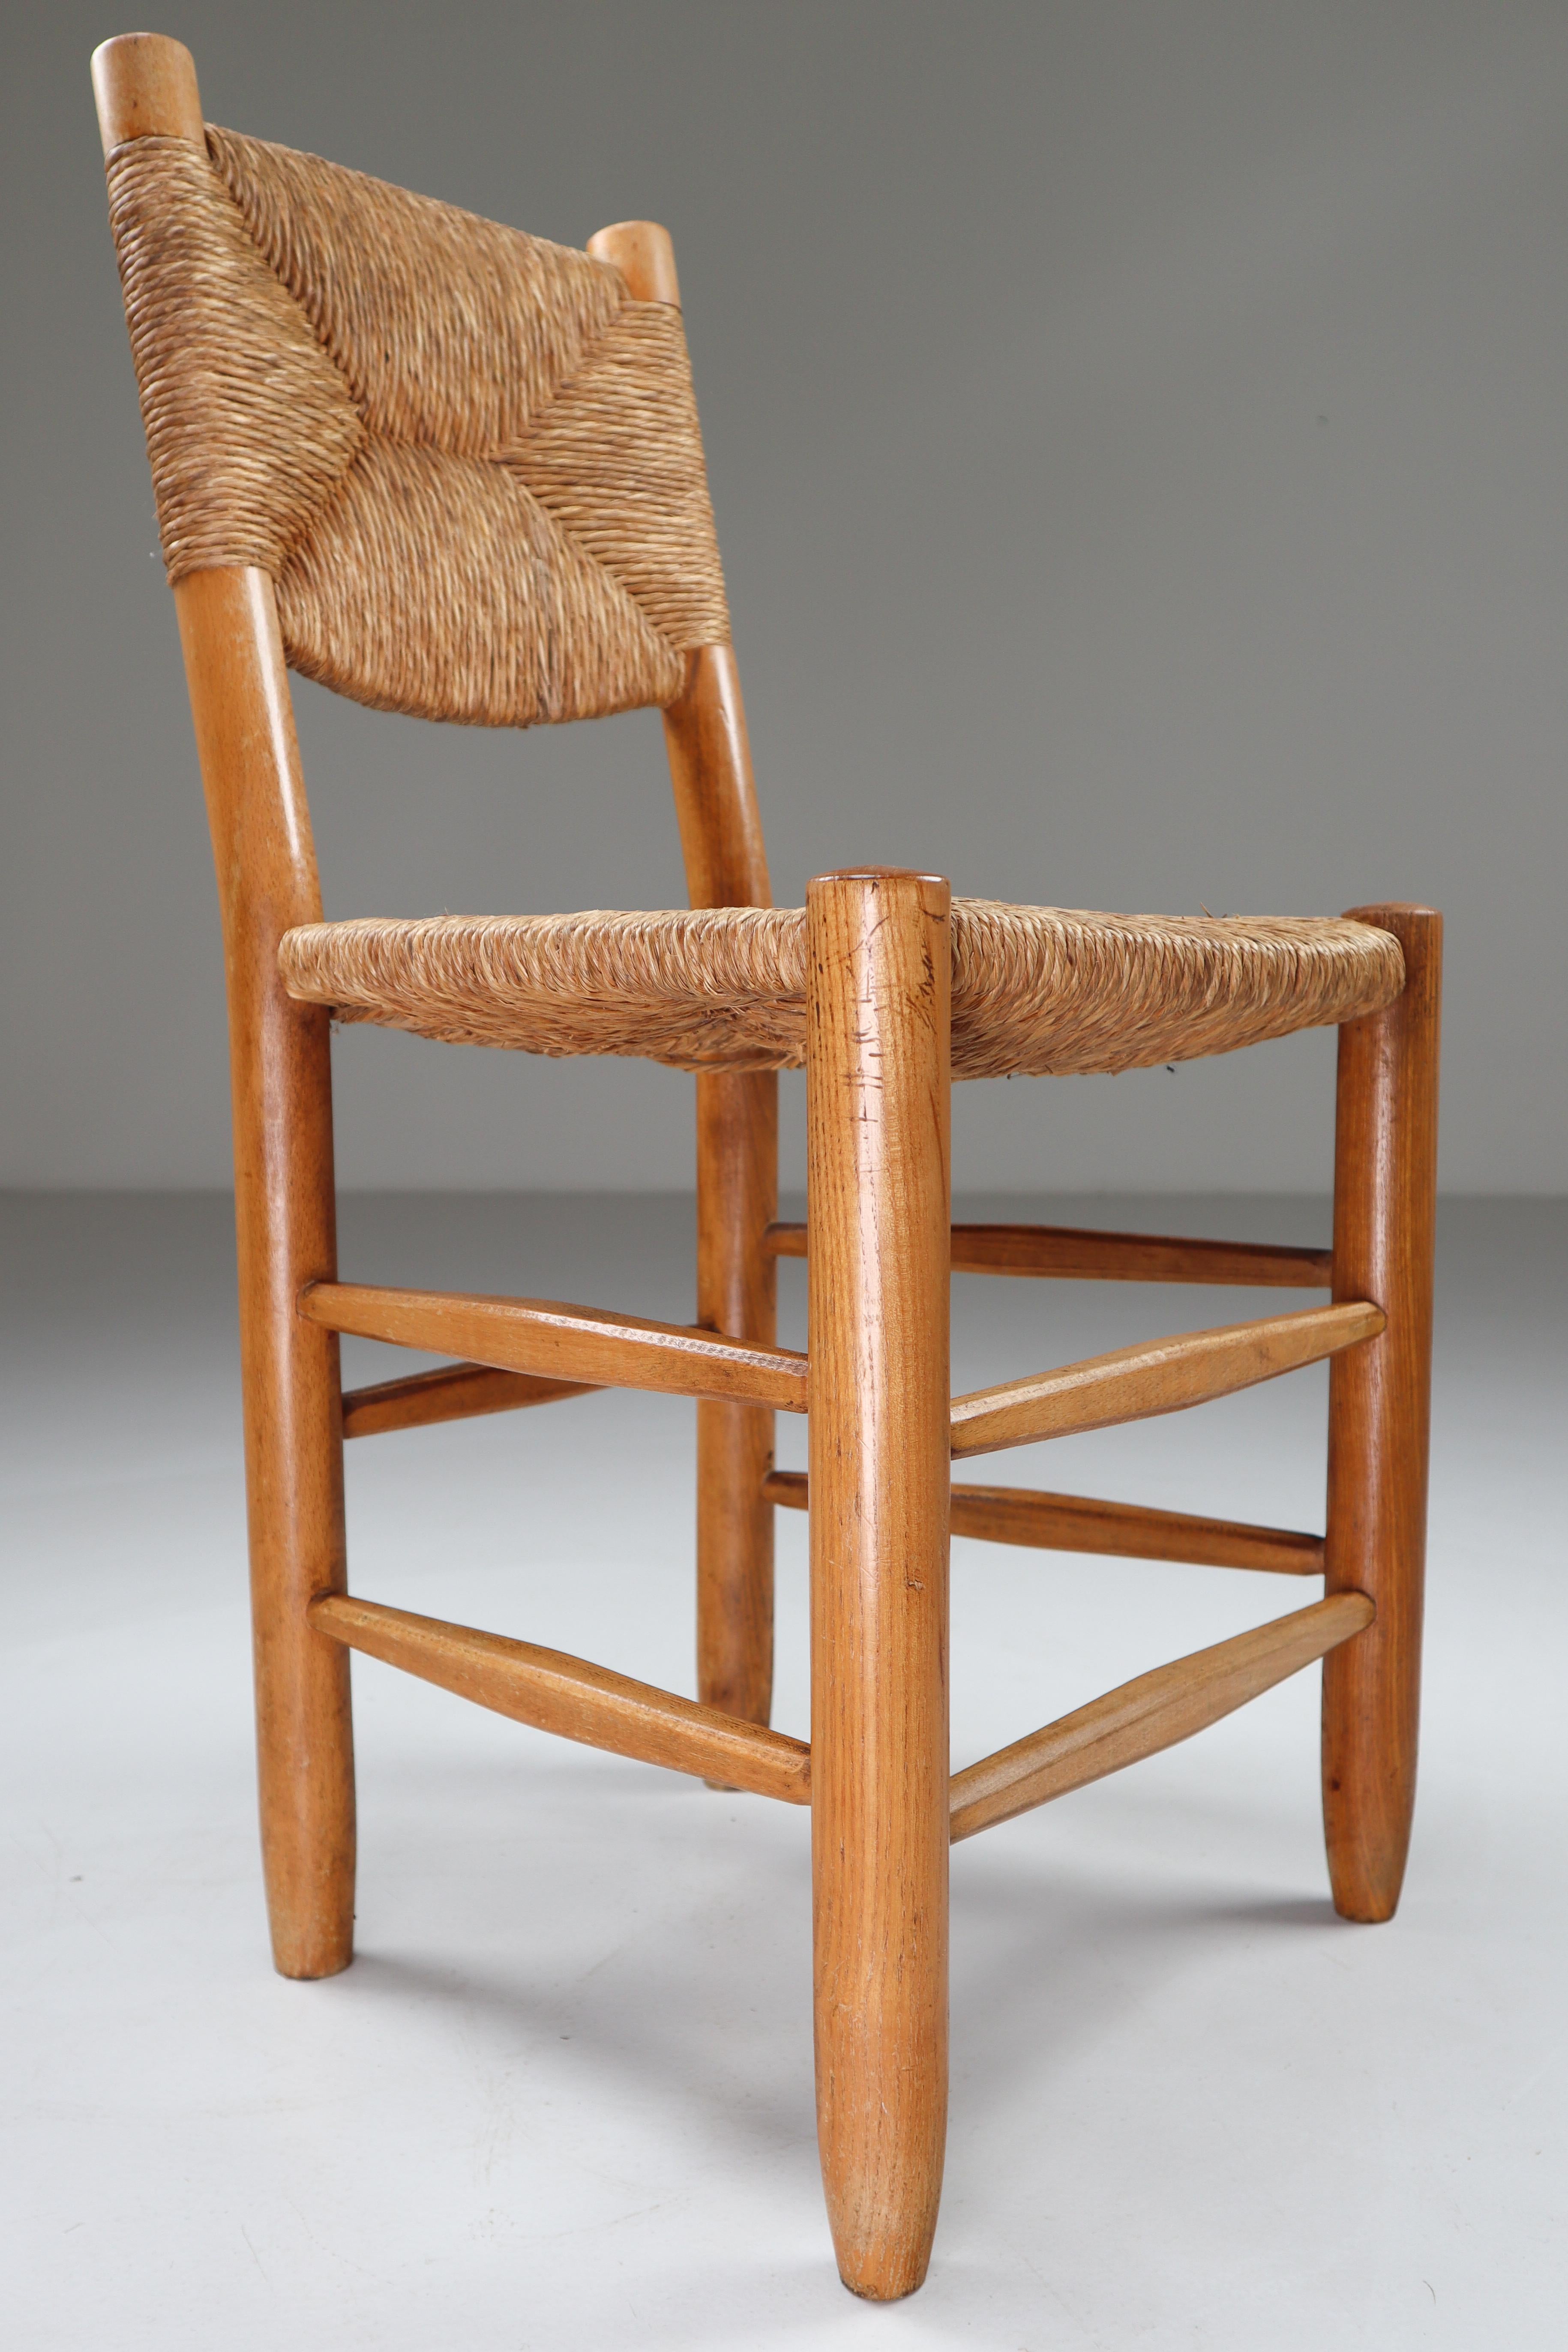 Characteristic chair of wood and straw in one of the quintessential midcentury designs of their creator, the famous French furniture maker Charlotte Perriand. The chair is in a great original condition and have a great patina and natural wear to the